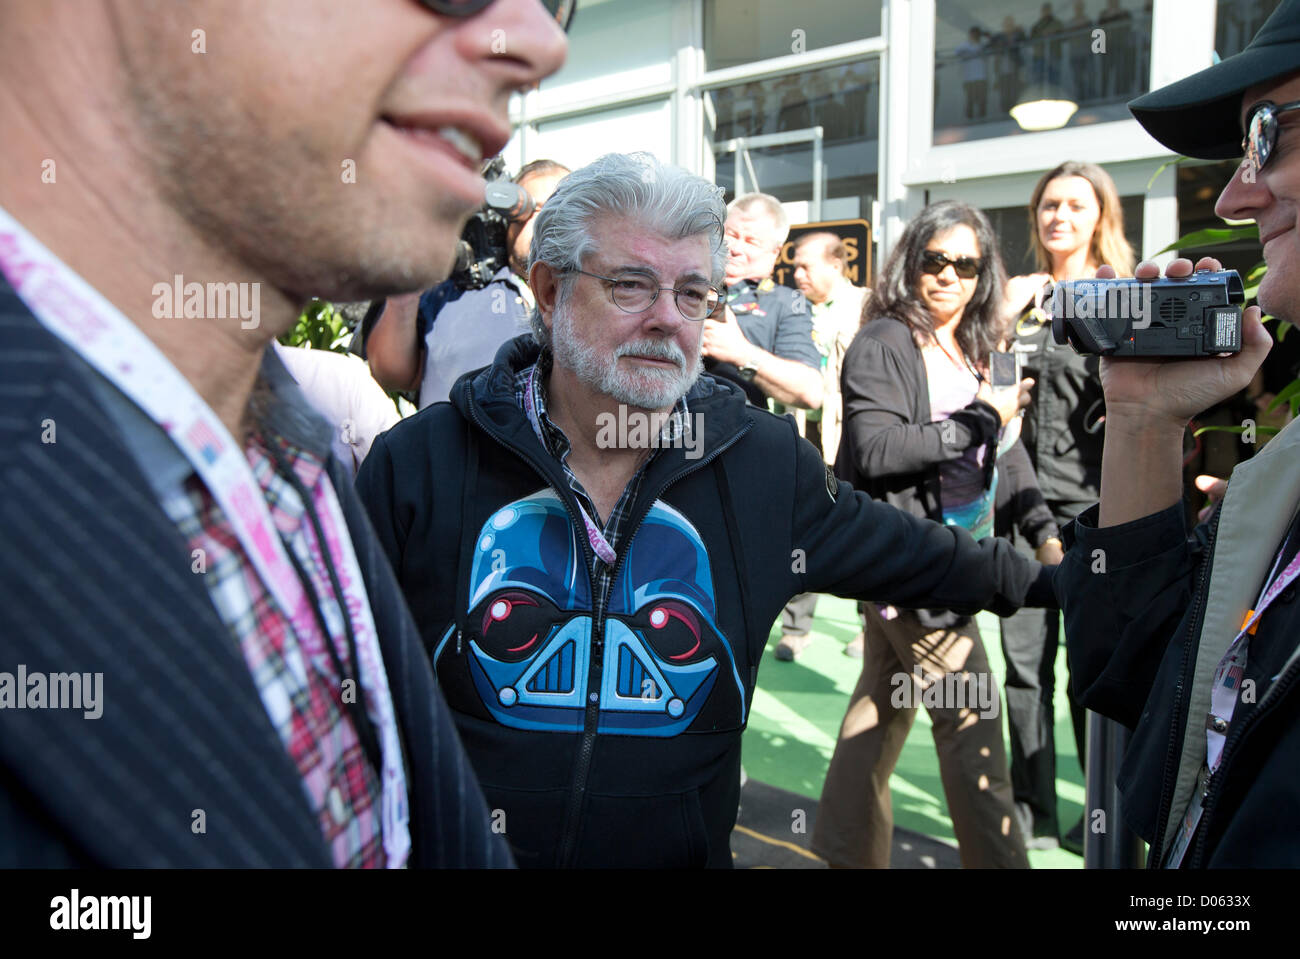 Austin, Texas, USA. 18th November 2012. November 18, 2012, Austin, TX USA: Director and  filmmaker George Lucas (r) in the paddock area at the Circuit of the Americas track prior to the inaugural United States Grand Prix in Austin, Texas. Stock Photo